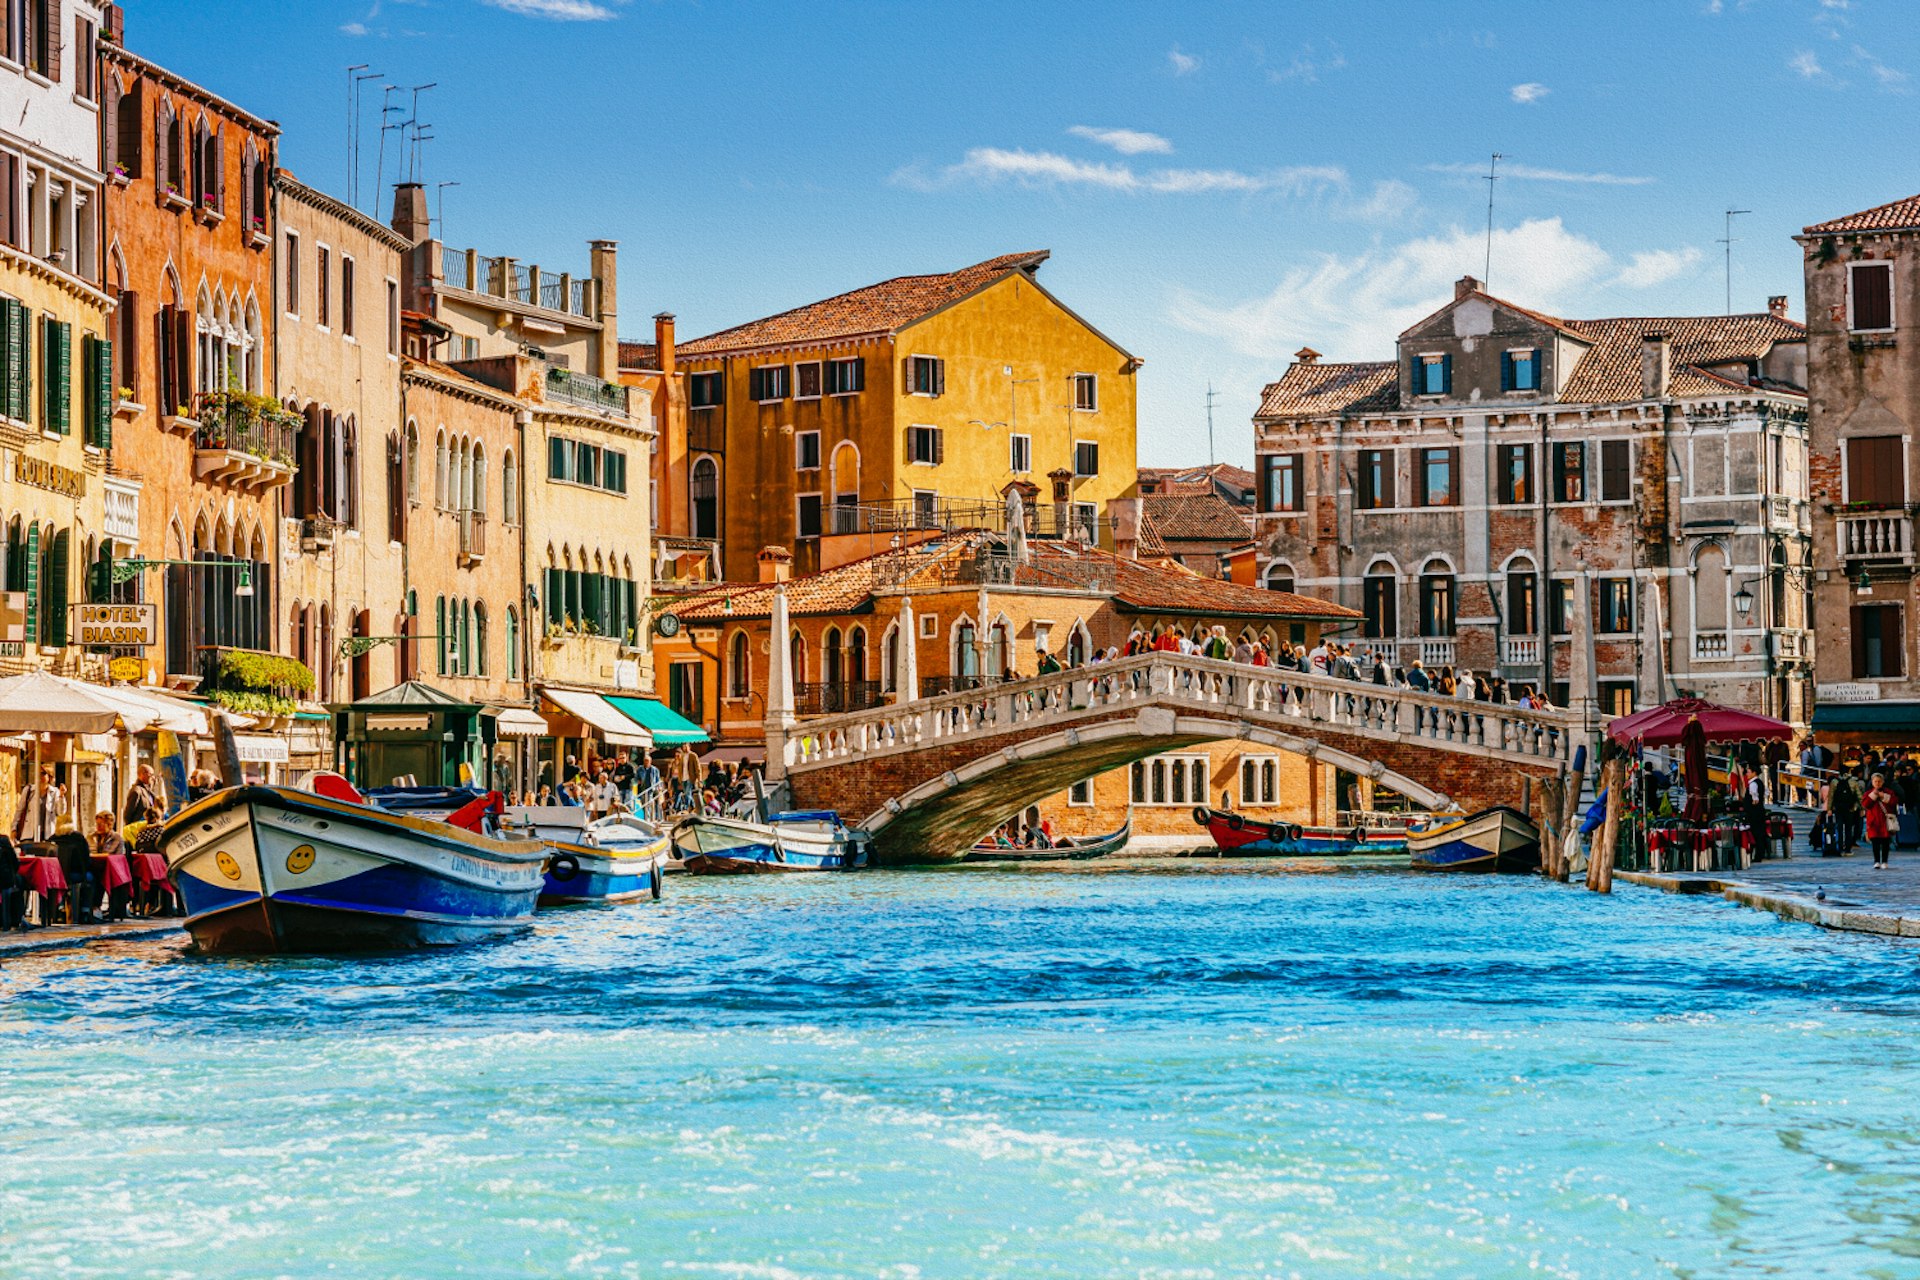 Features - Ponte delle Guglie in Venice, Italy